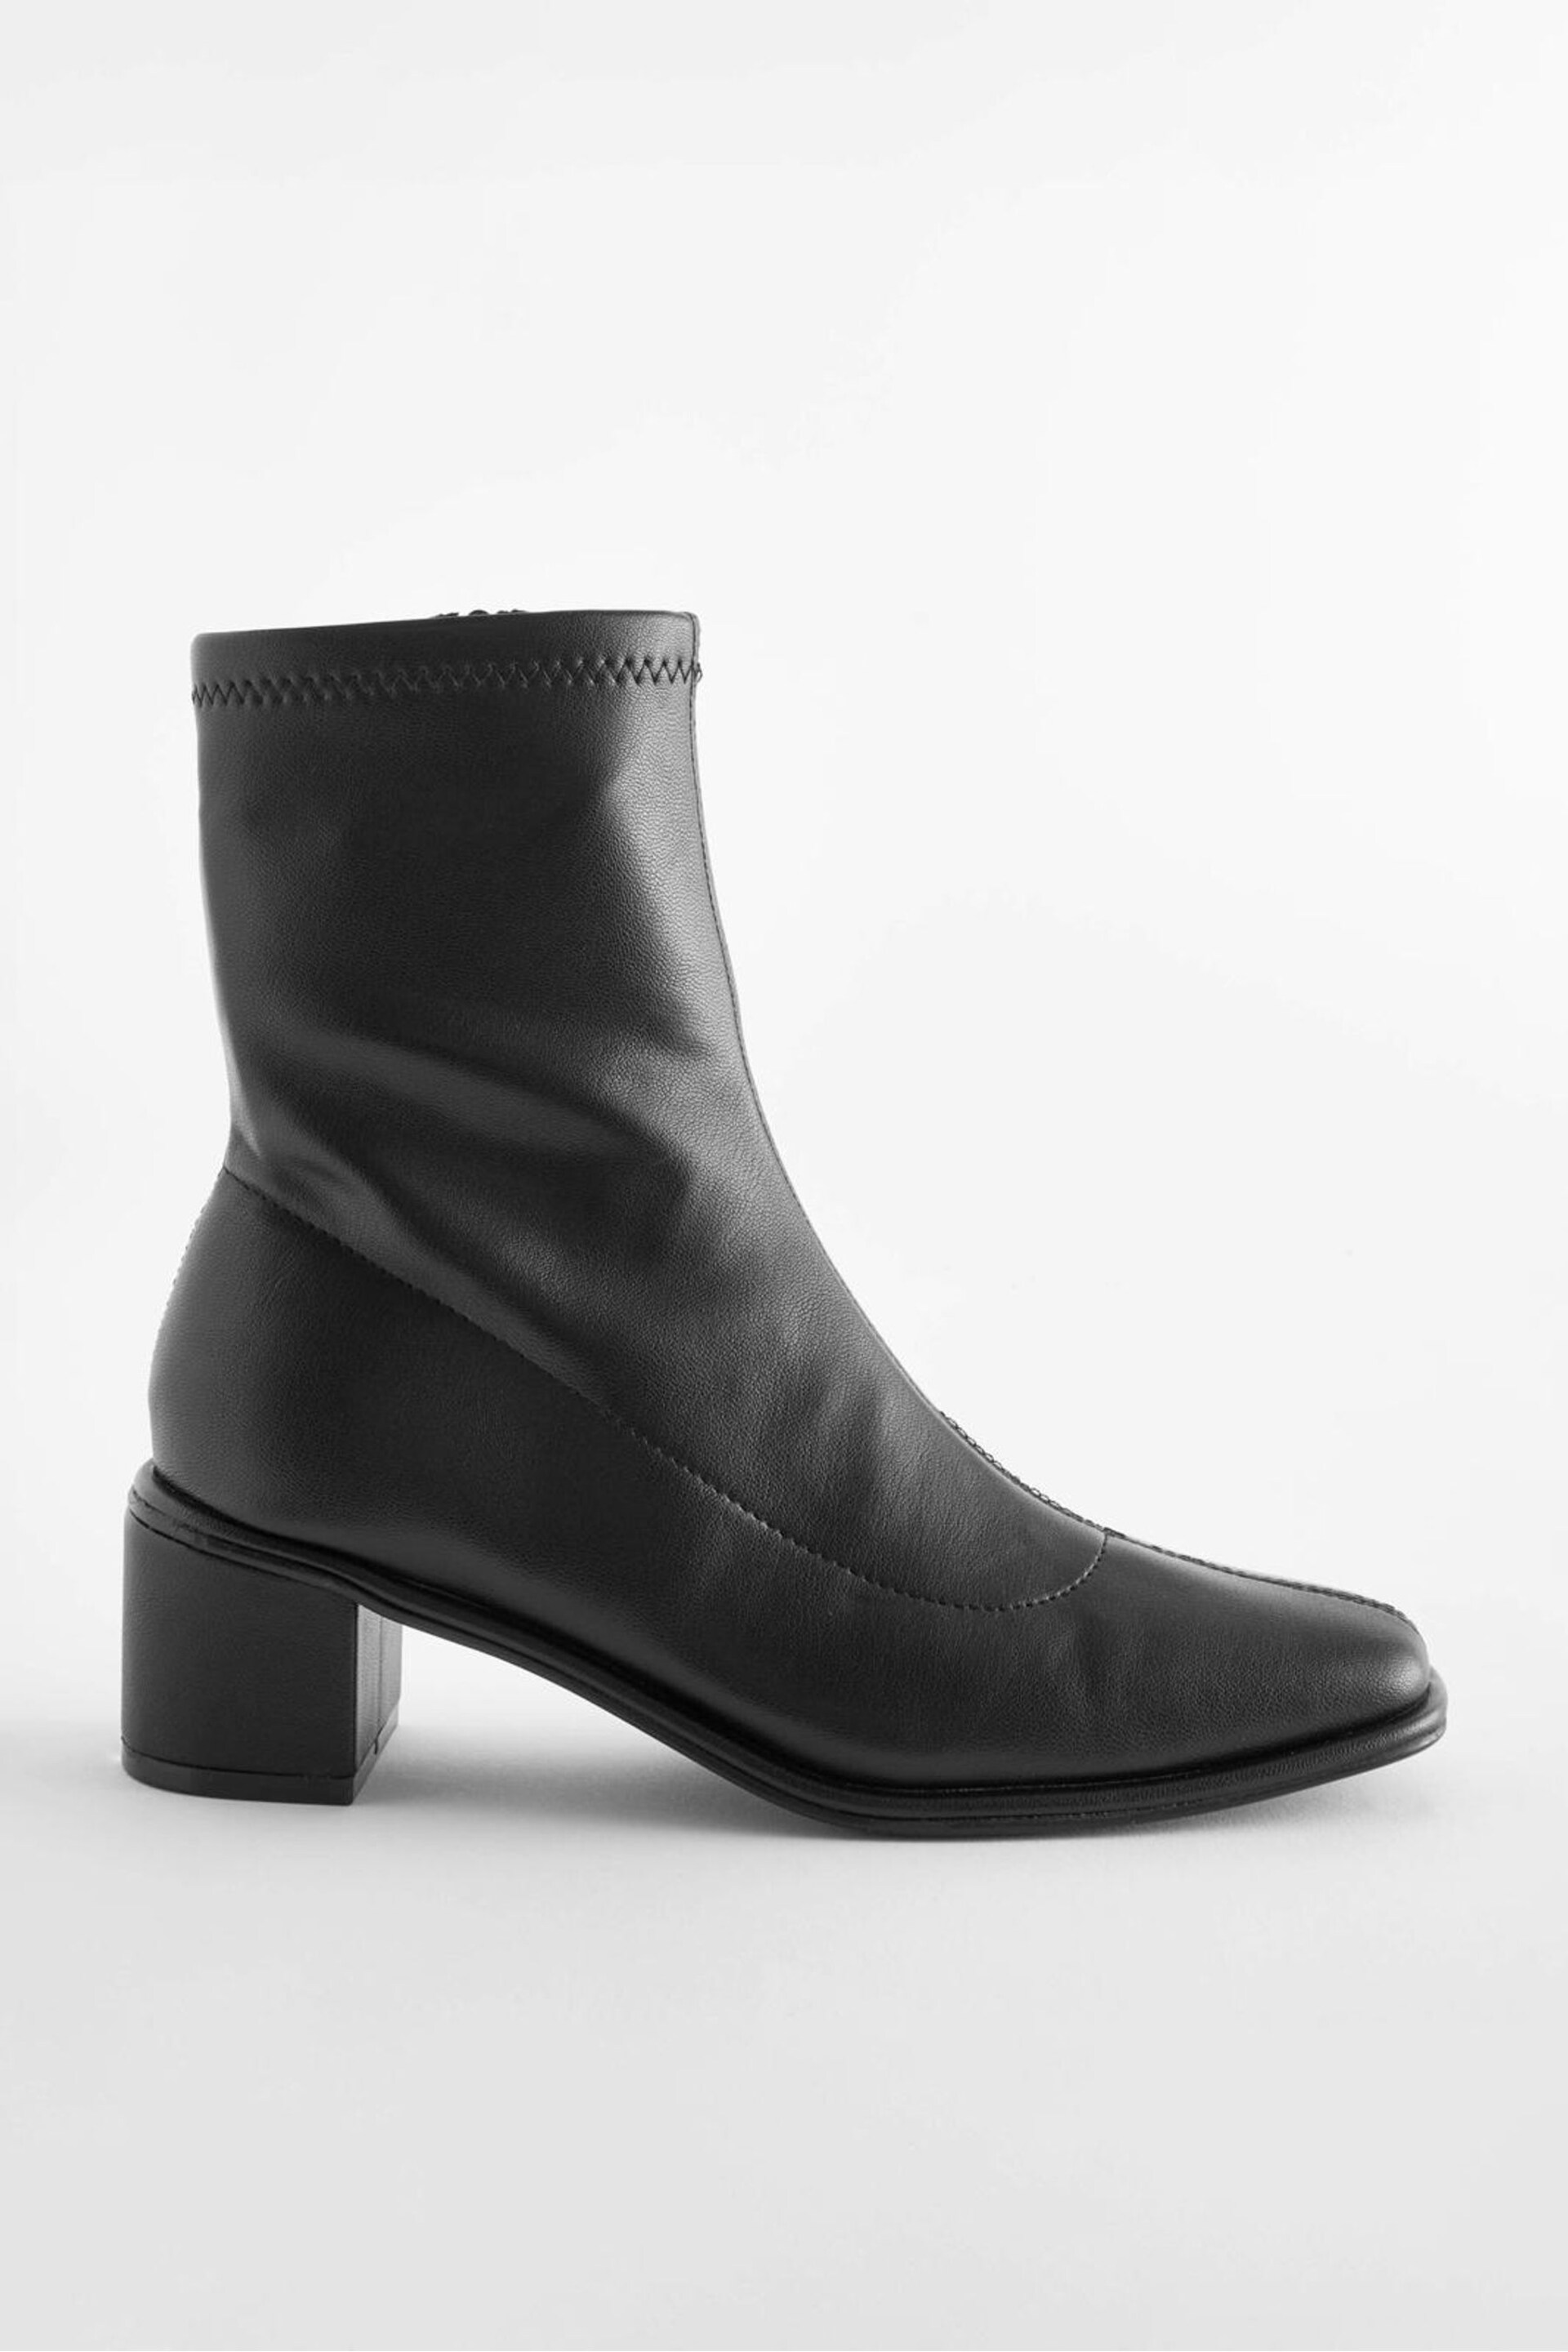 Black PU Extra Wide Fit Forever Comfort® Sock Ankle Boots - Image 1 of 5